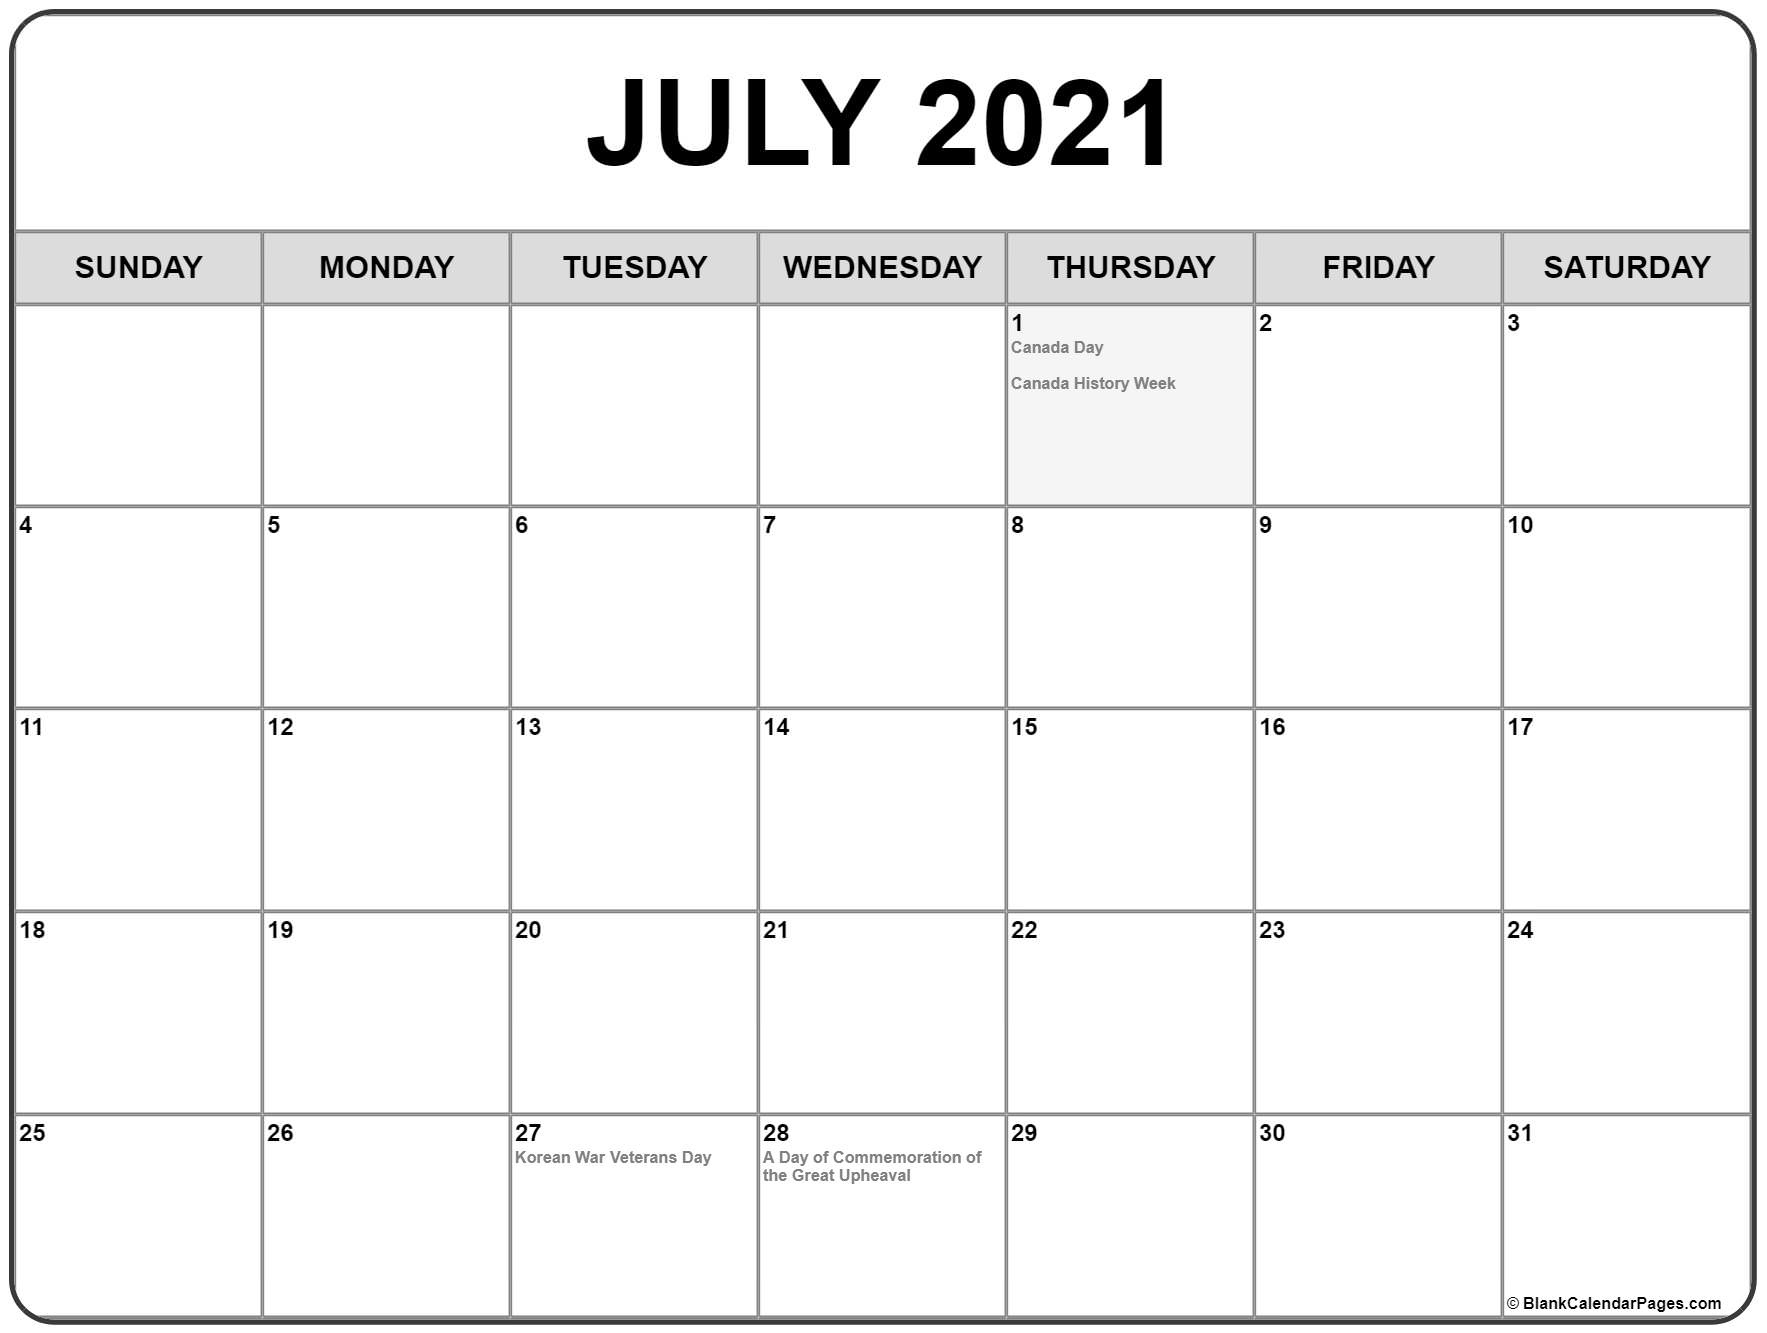 July 2021 Calendar With Holidays 2021 Calendar For July And August